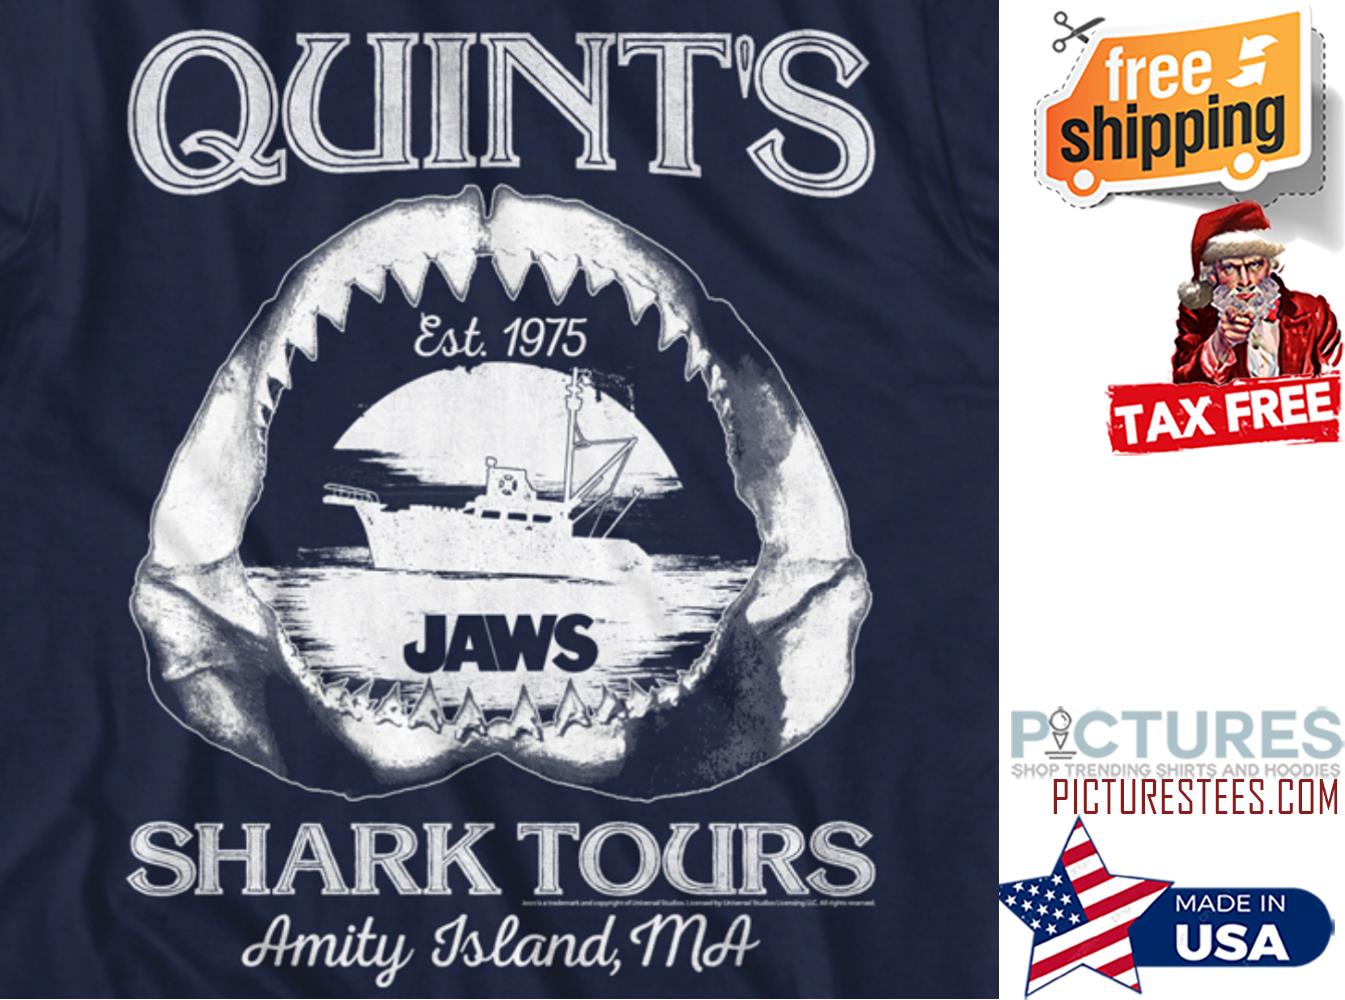 FREE shipping Quint's EST 1978 Jaws shark tours amity island MA